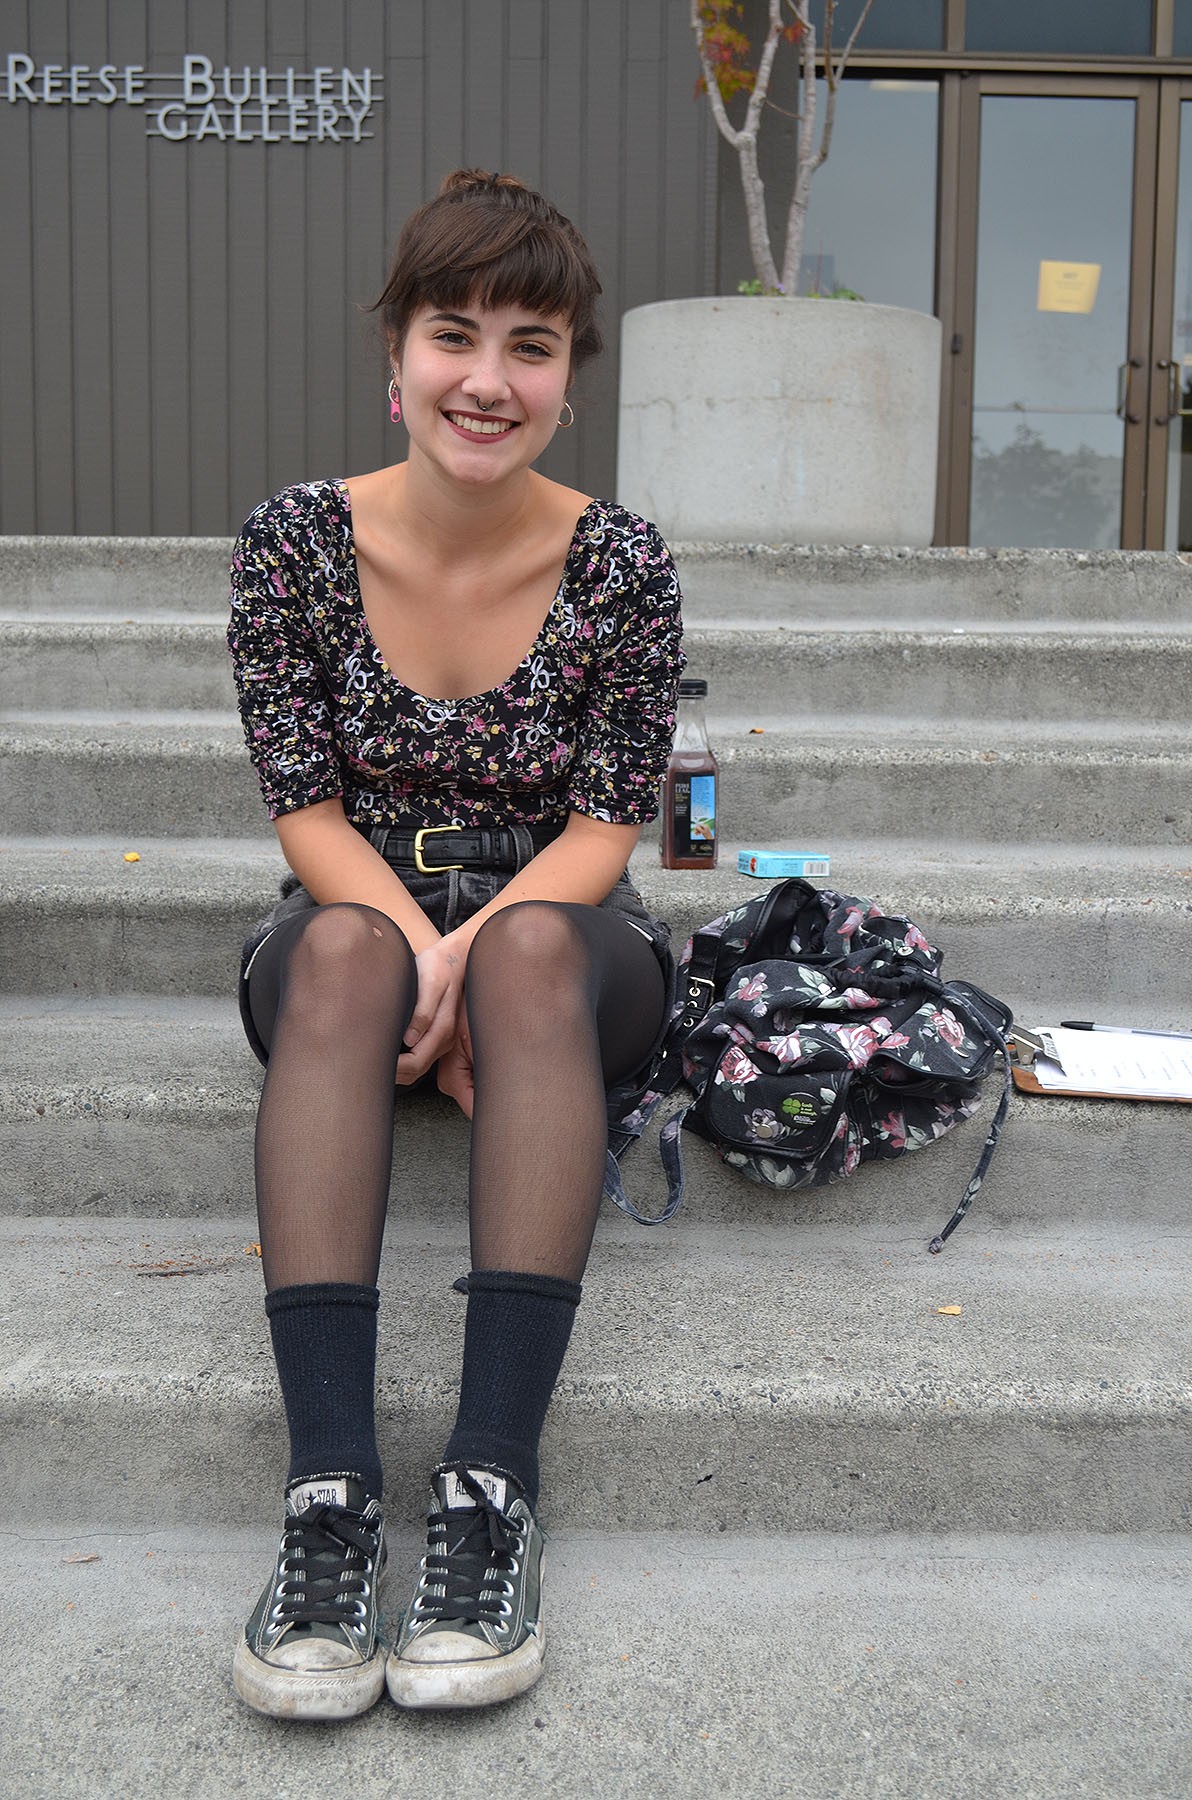 Junior child development major Brittany is from Victorville, but loves Humboldt and the Angels of Hope thrift shop. The shorts and tights she scored at Target. - PHOTO BY SHARON RUCHTE